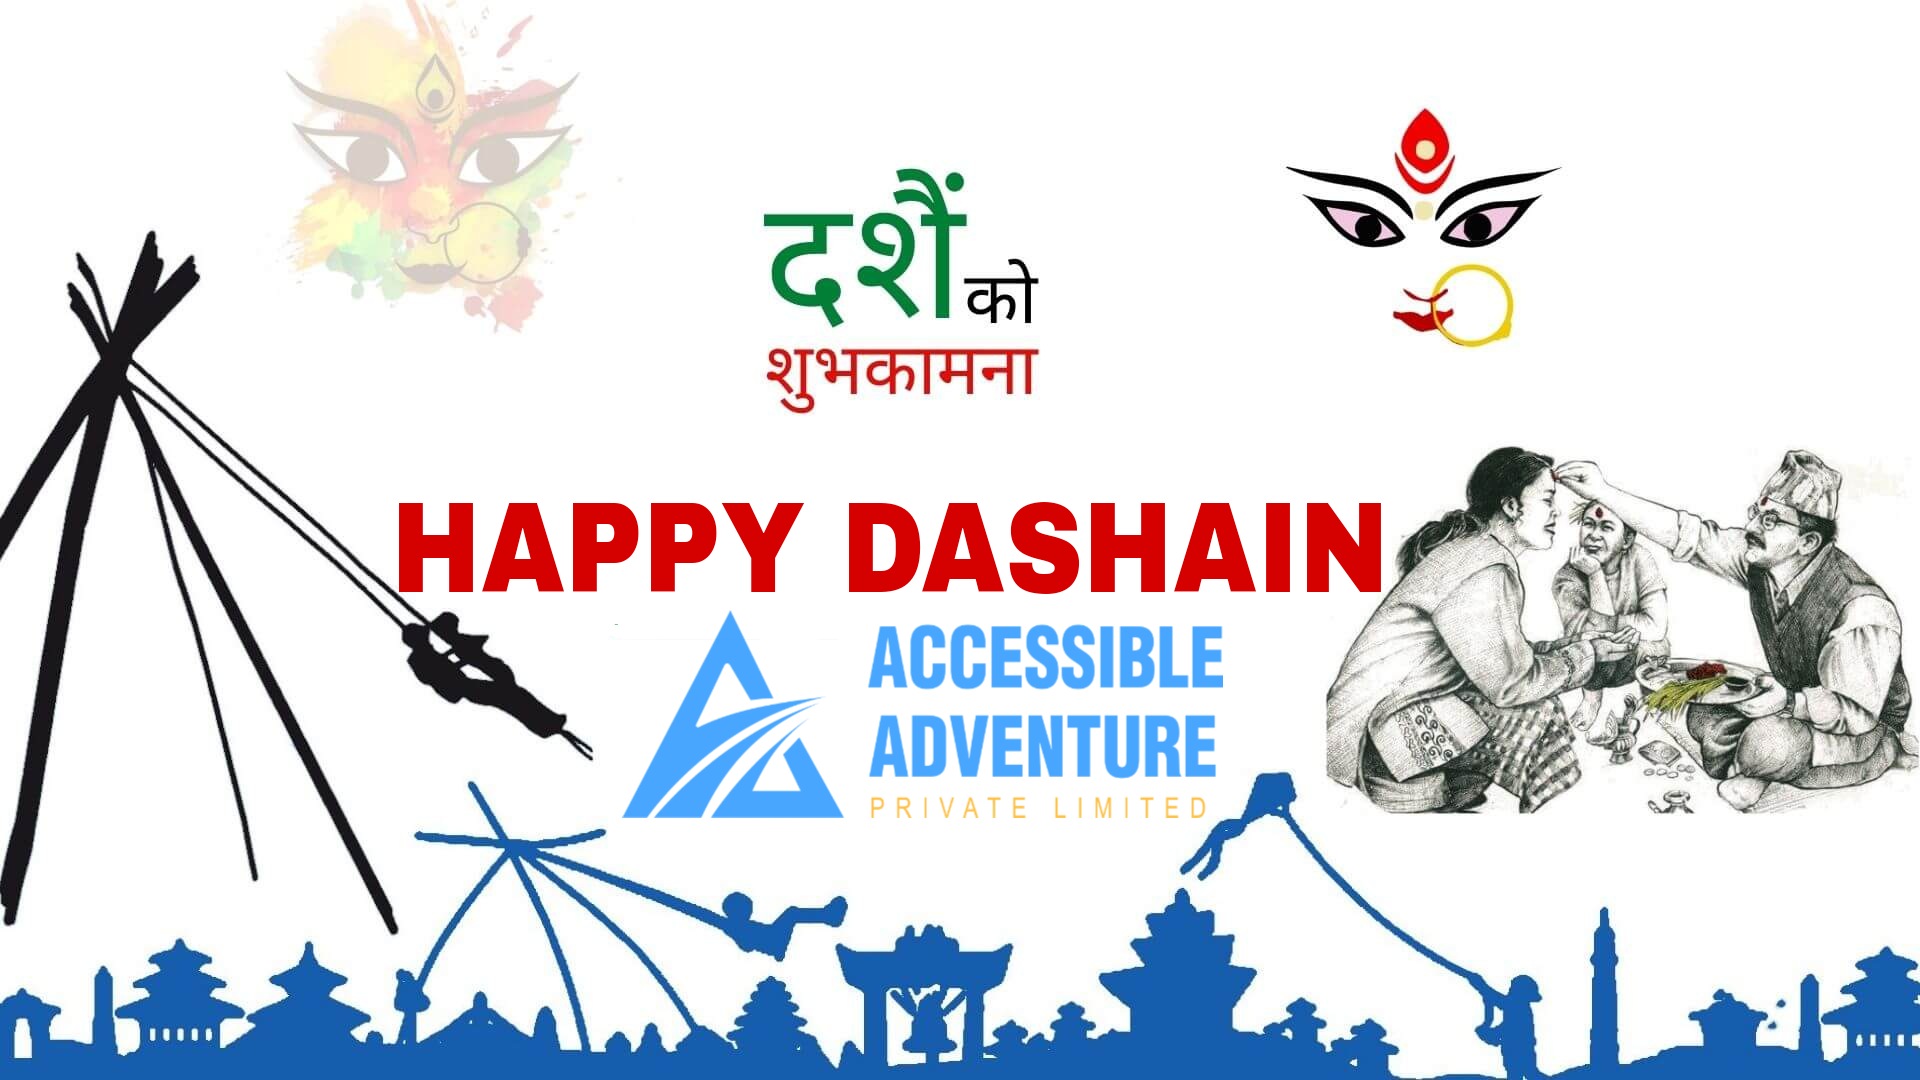 About Dashain Festival in Nepal